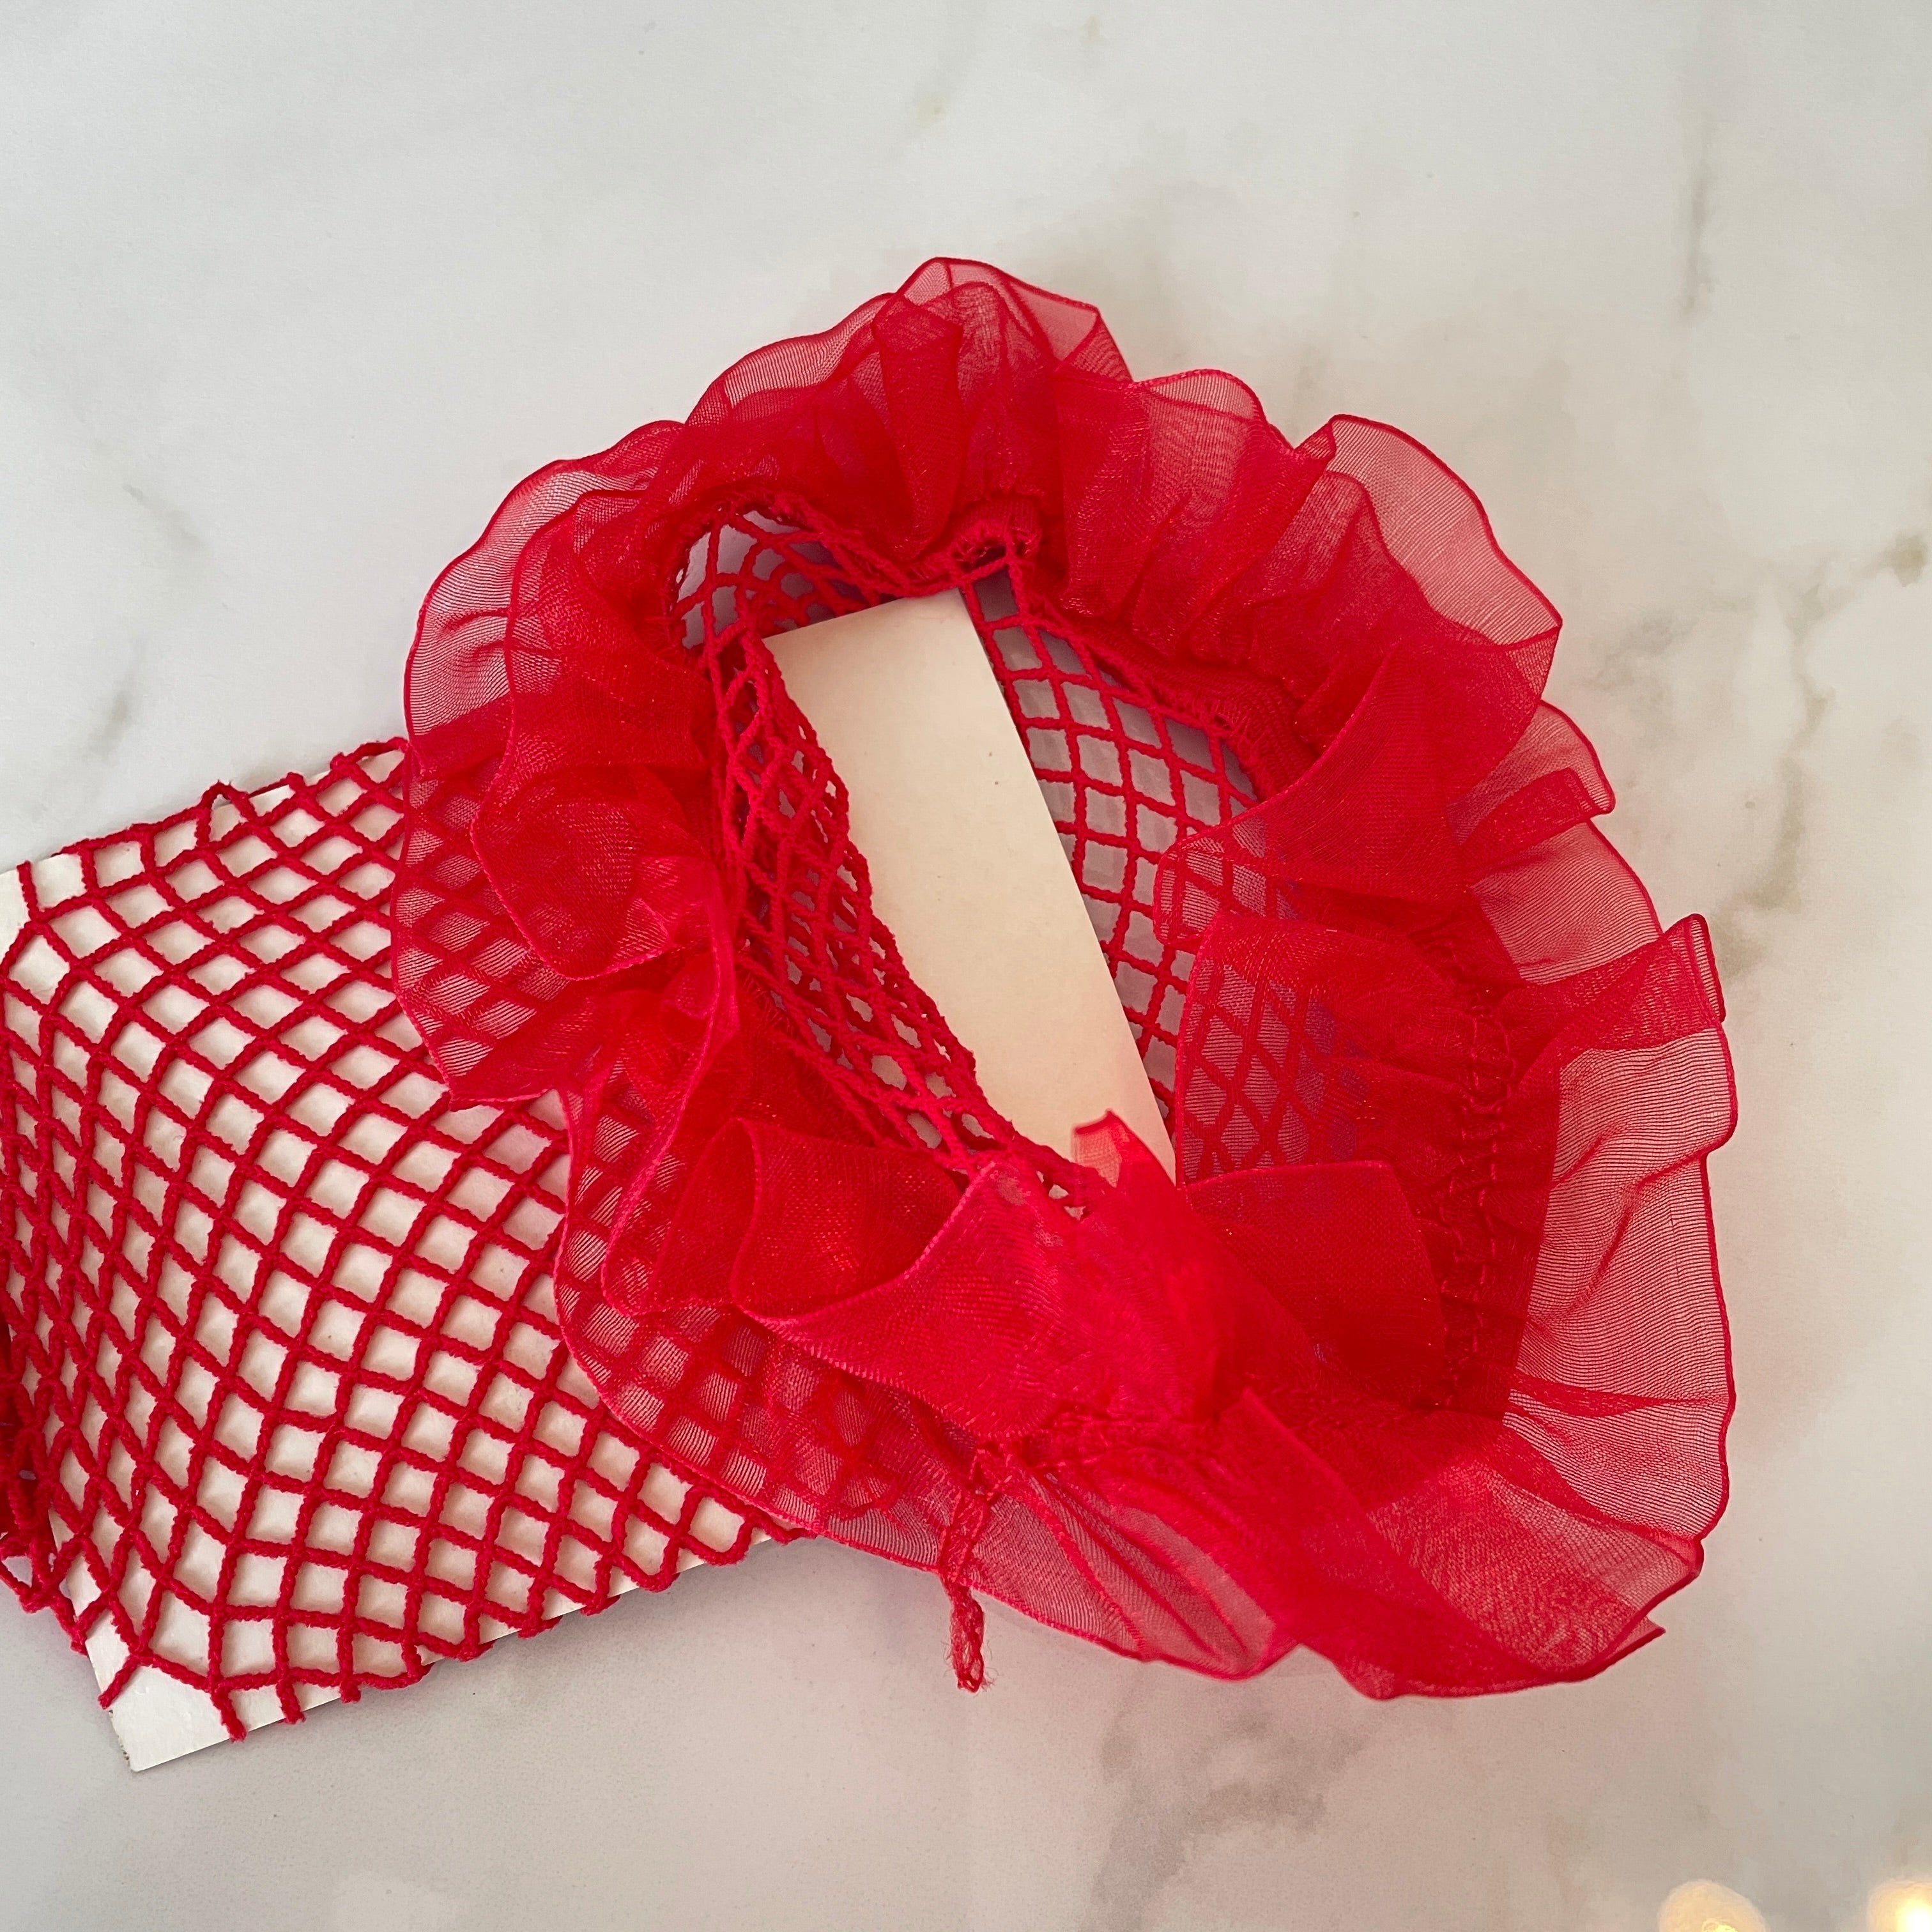 Ruffle fishnet stocking Accessories LOVEFREYA Free size Red 